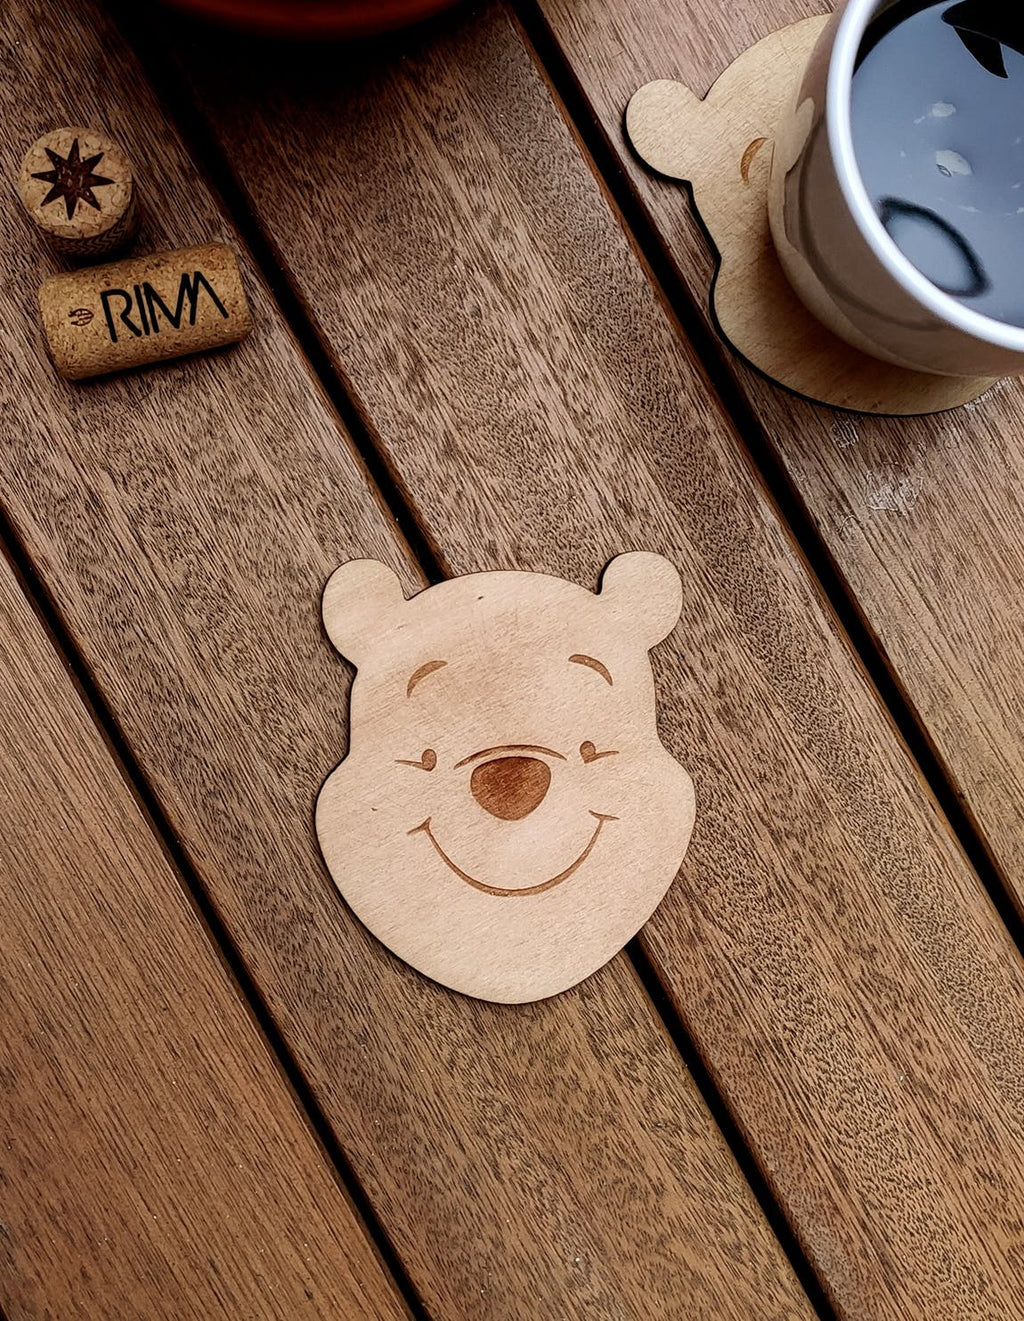 Set of 2 wooden coasters of Winnie the Pooh